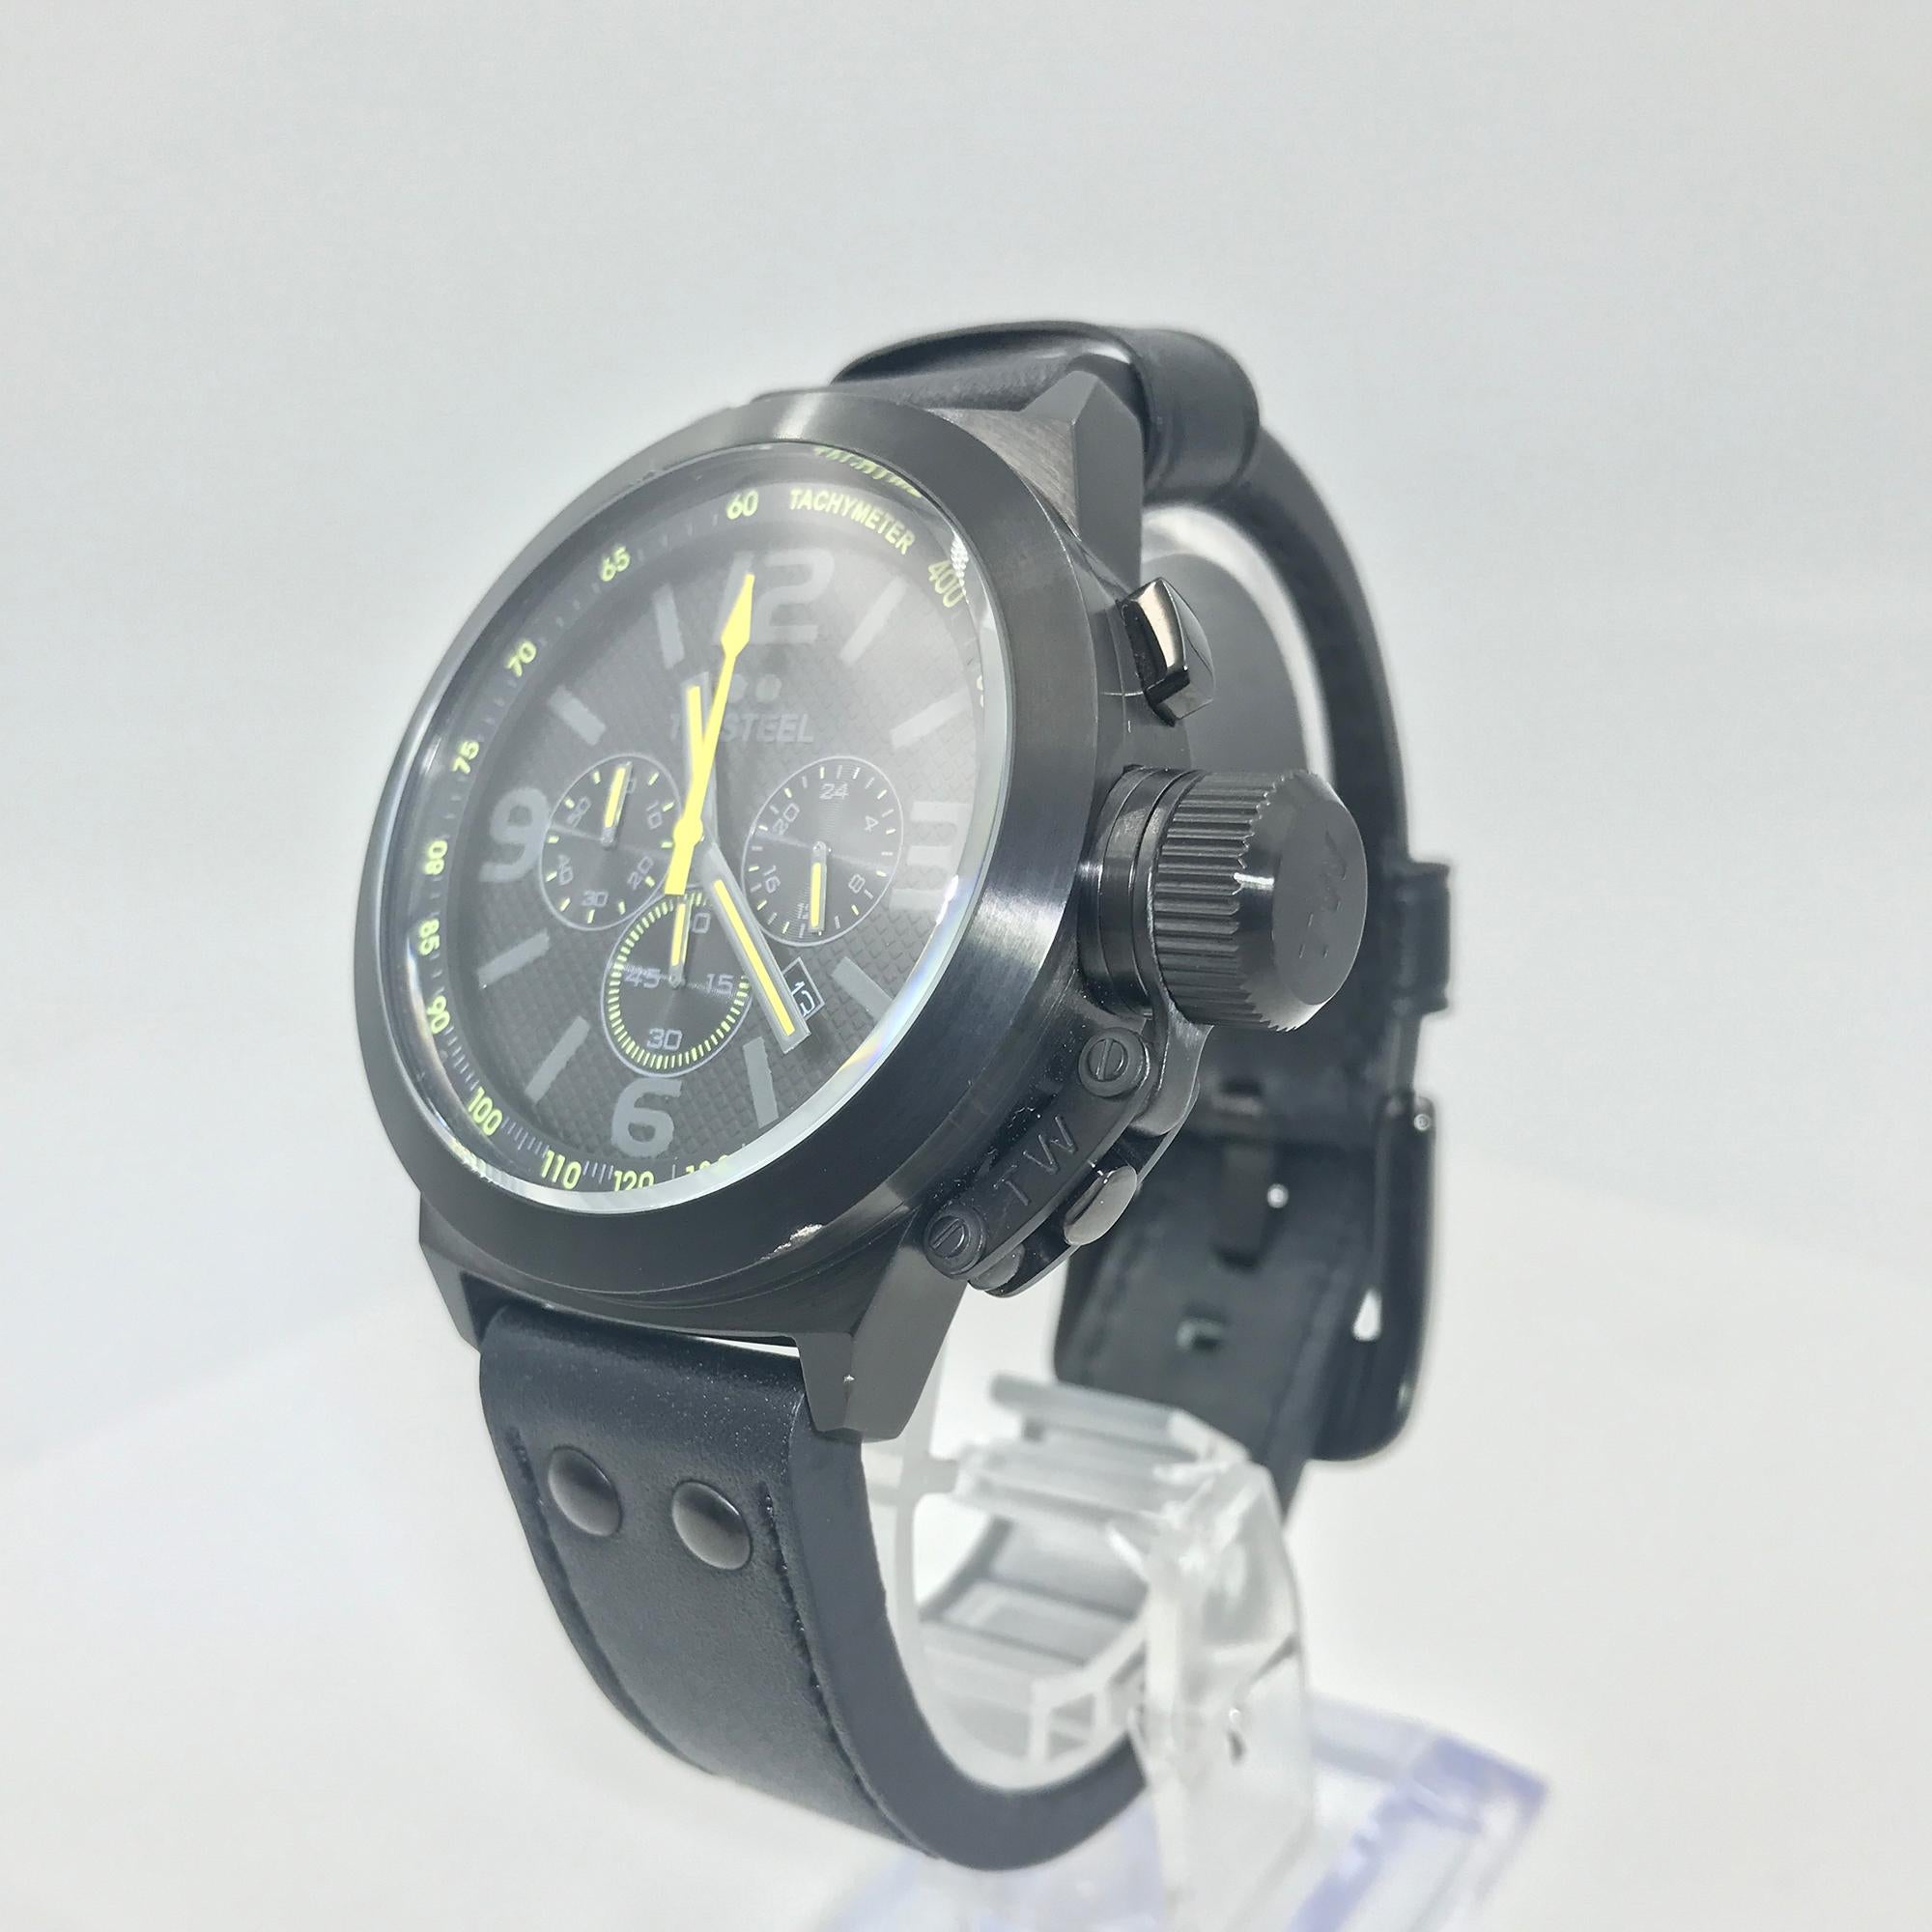 This is new with defects watch.
The case has Minor scratches and nicks.
The crystal has minor scratch under close inspection.
Comes with original box and papers.
Missing hanging tags.

Quartz movement
Durable mineral crystal protects watch from